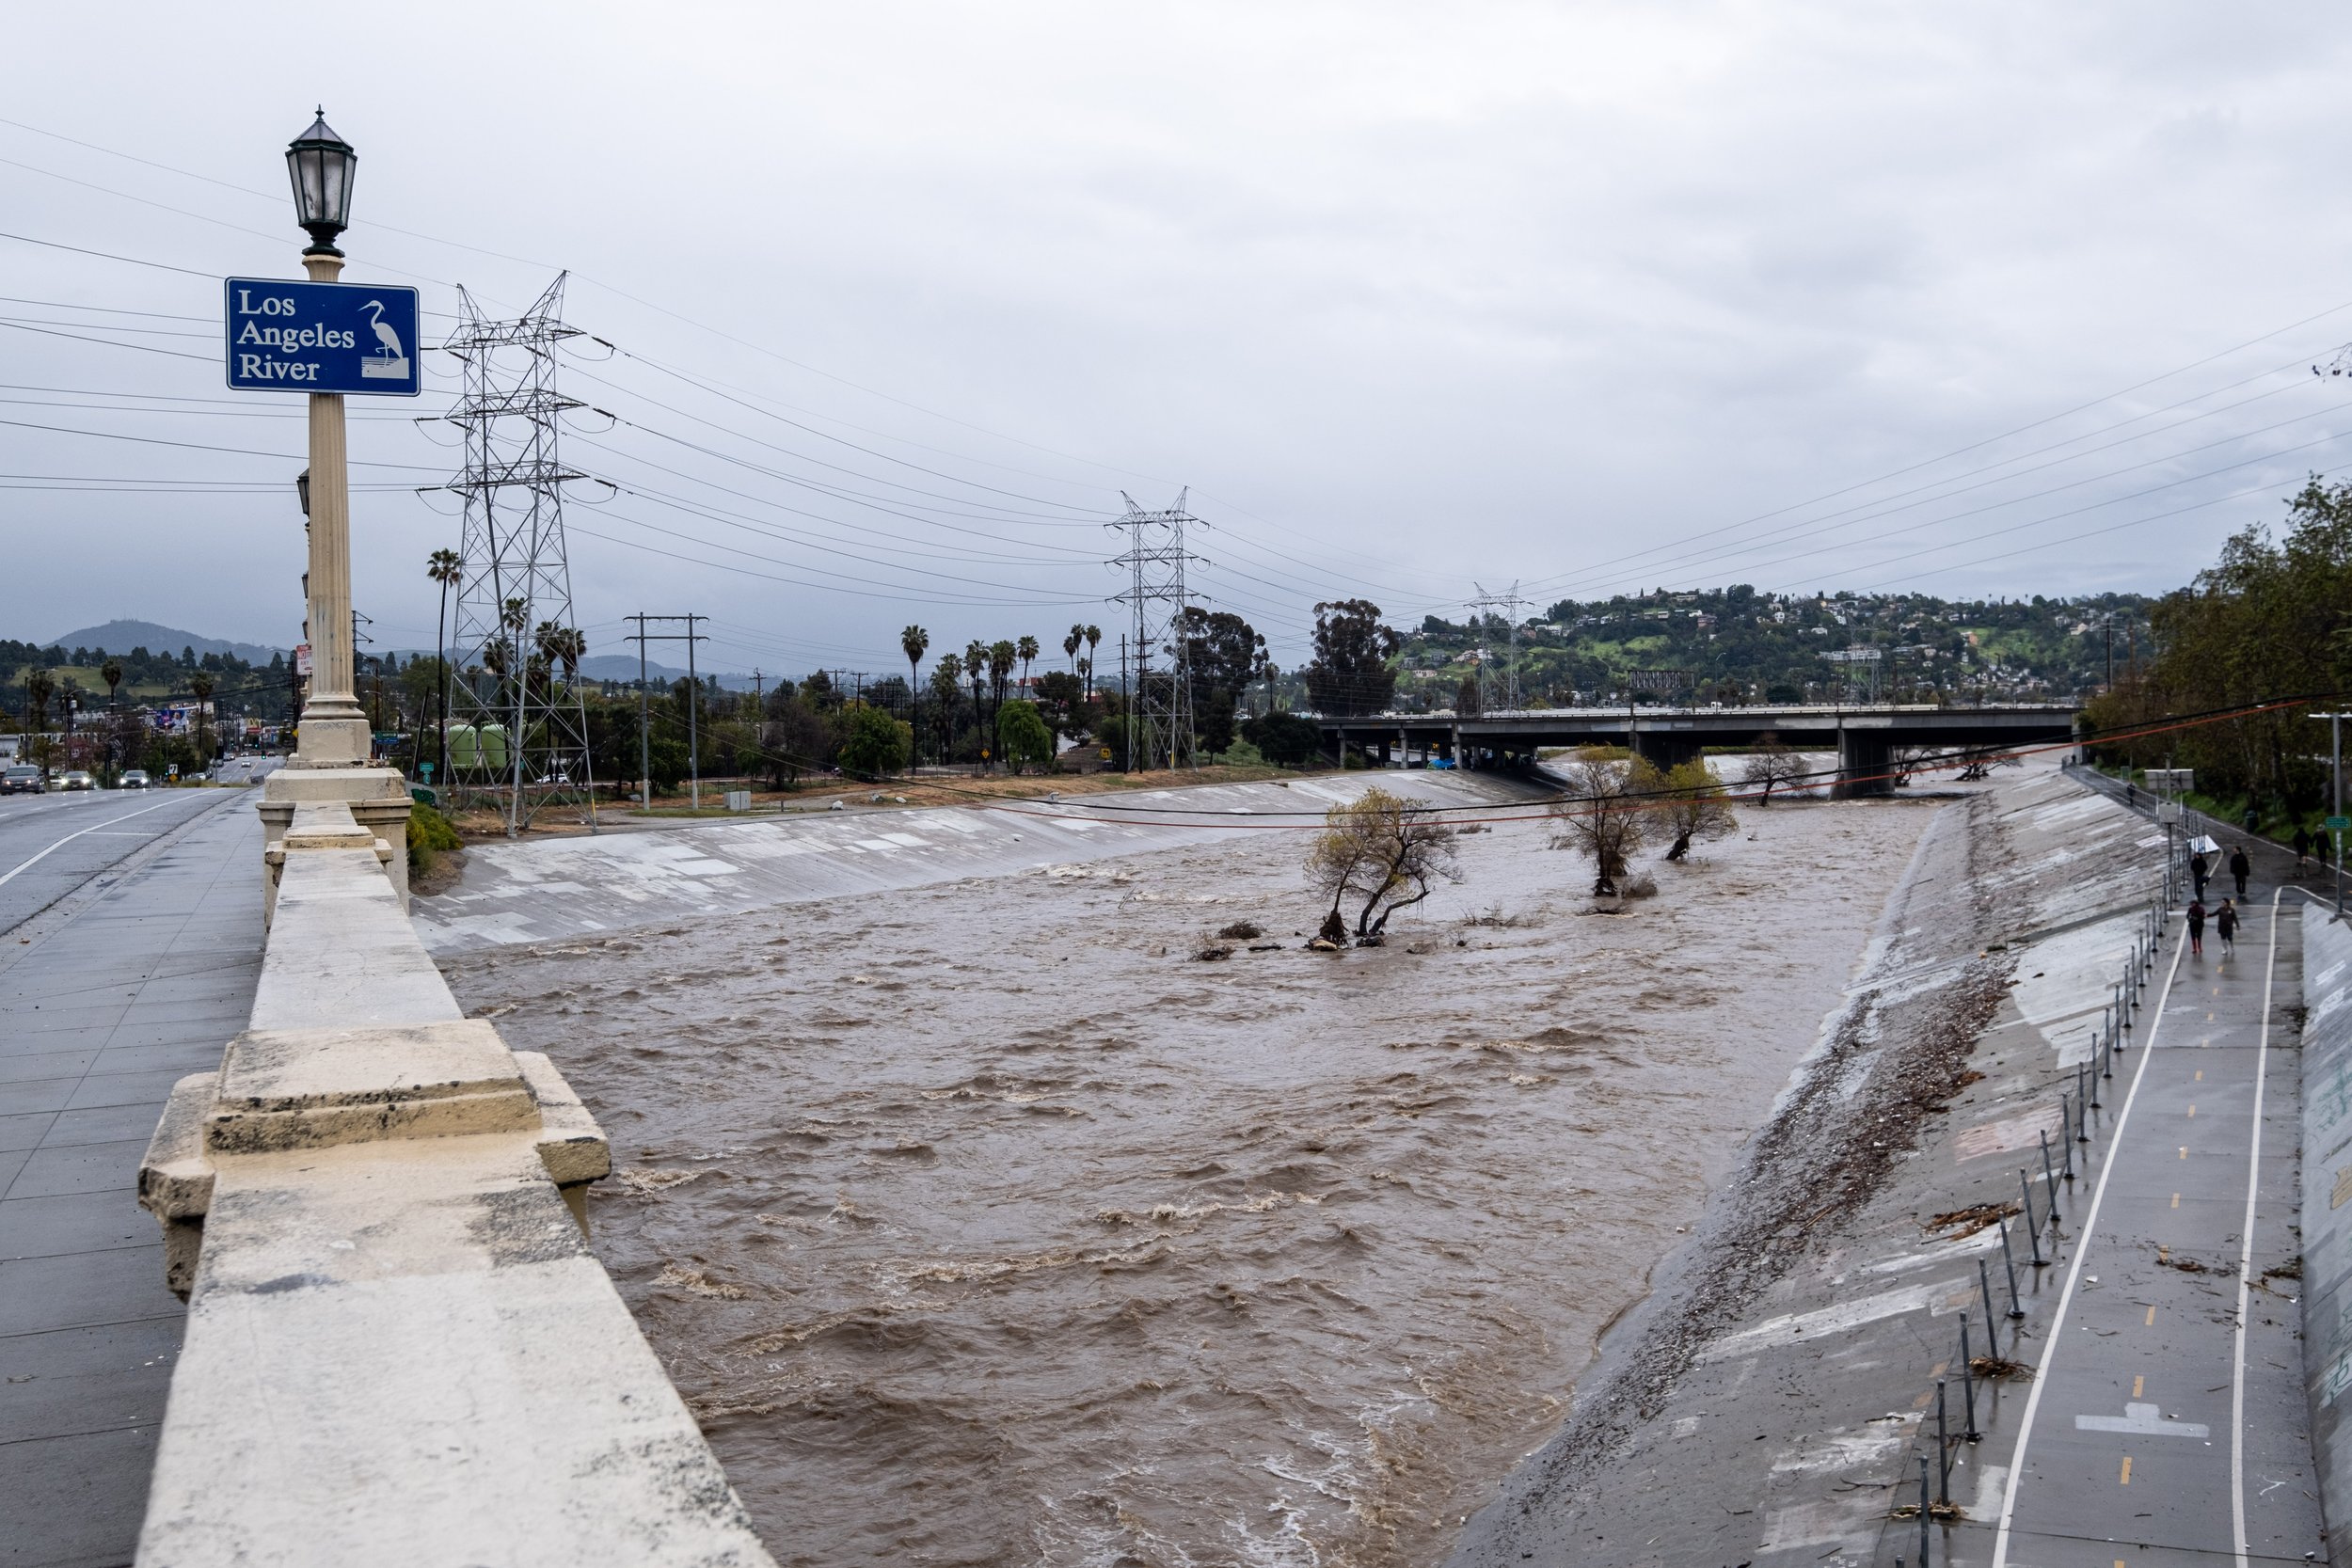  The Los Angeles River fills with water as heavy winter storms have poured down on the streets of Los Angeles, Calif. Seen from Fletcher Drive on Saturday February 25, 2023, the brown water surges through the concrete banks. (Akemi Rico | The Corsair